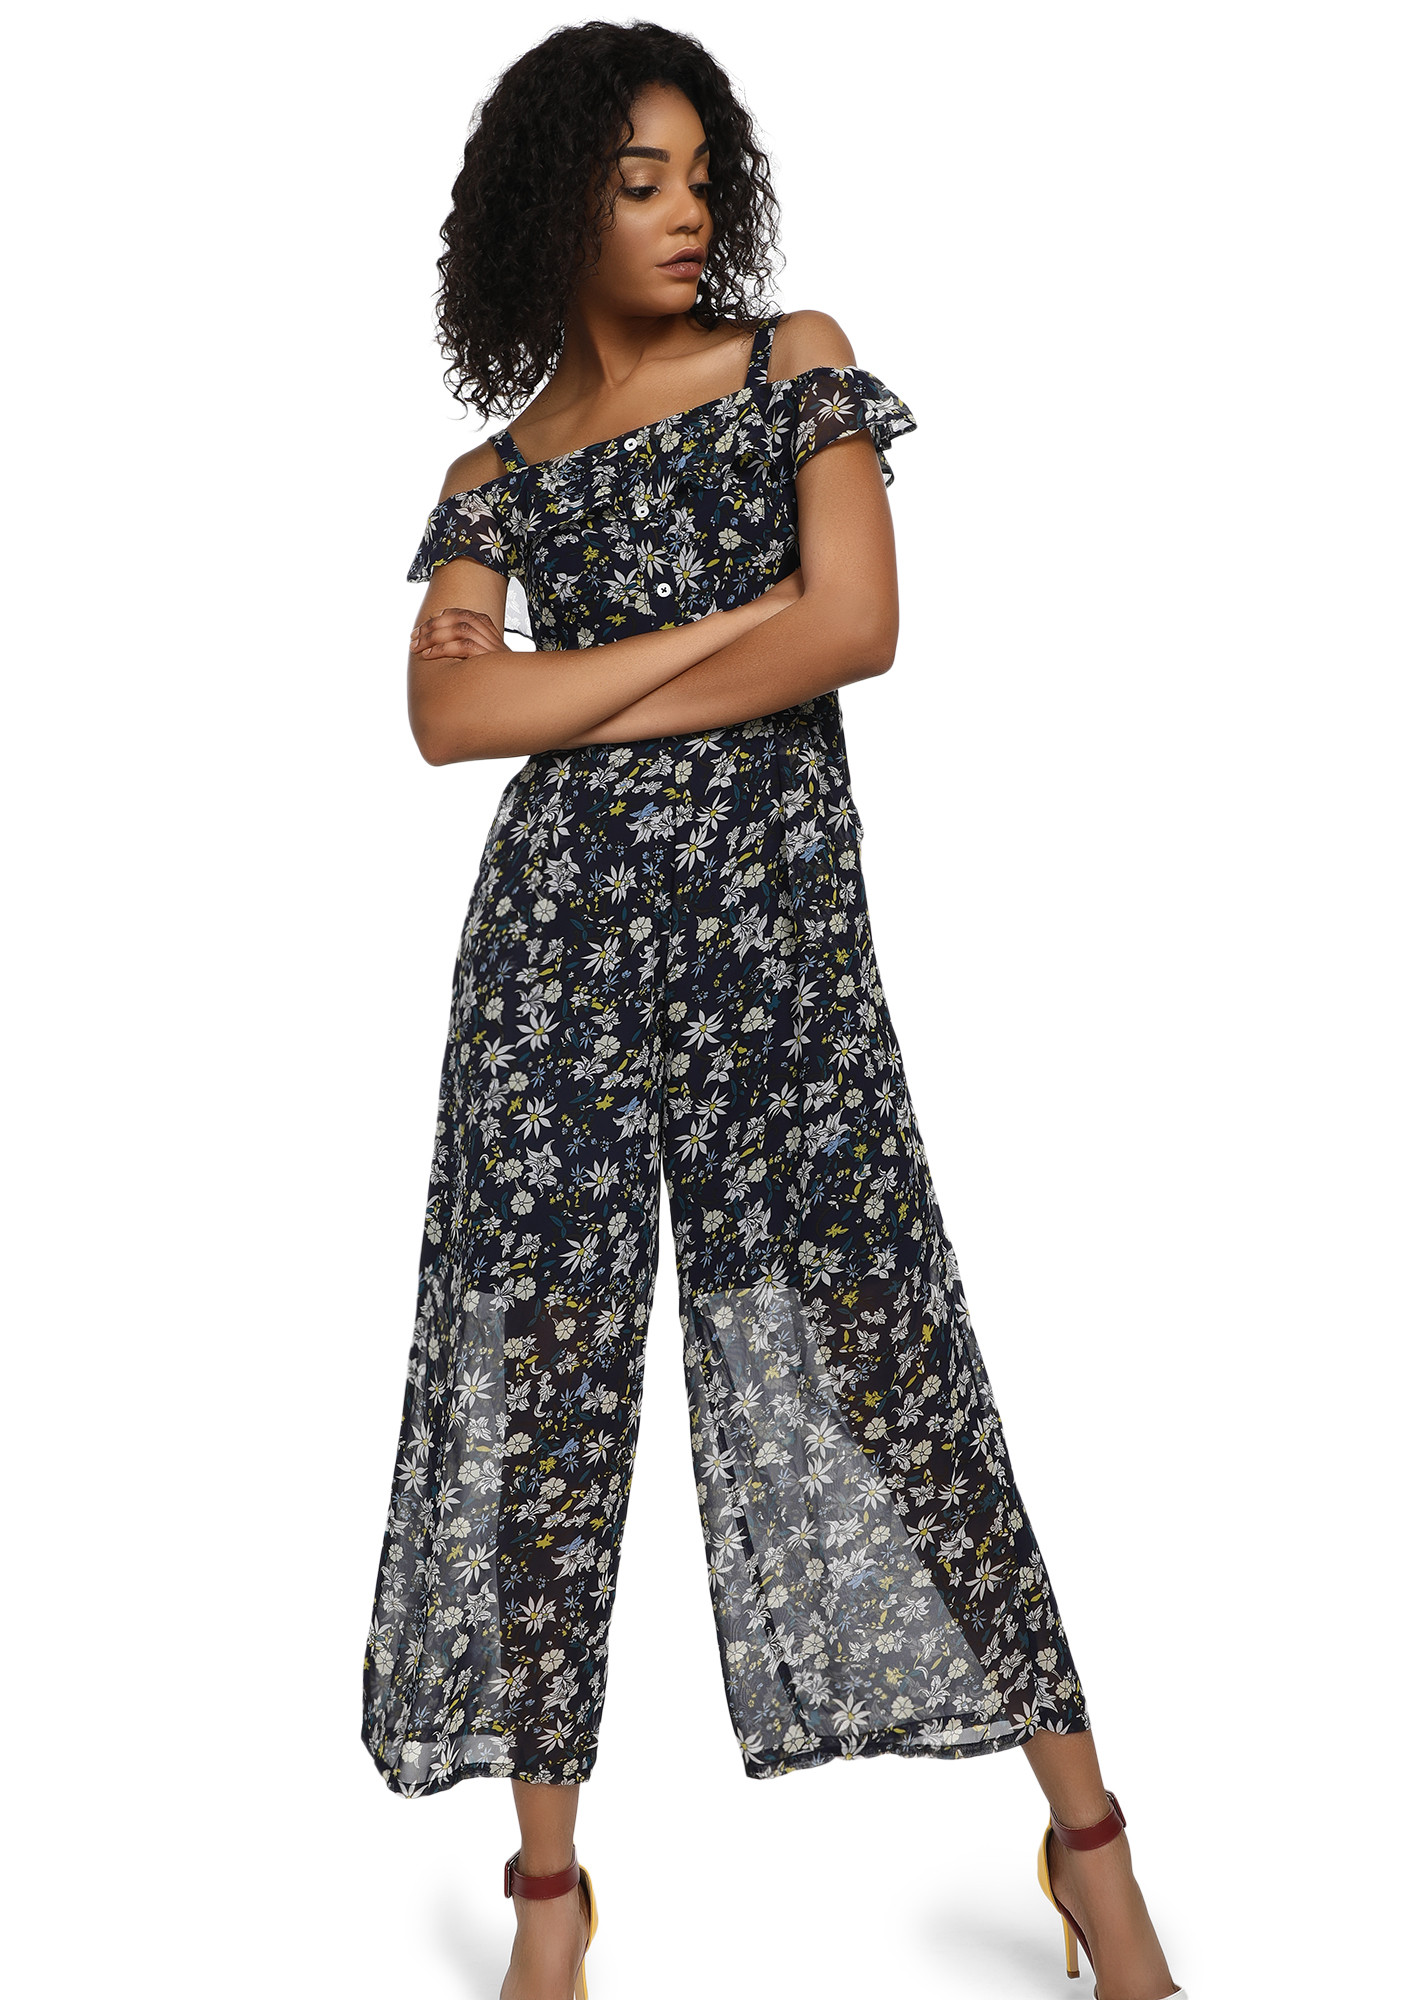 ALL DAY FLORAL DREAMS NAVY JUMPSUIT